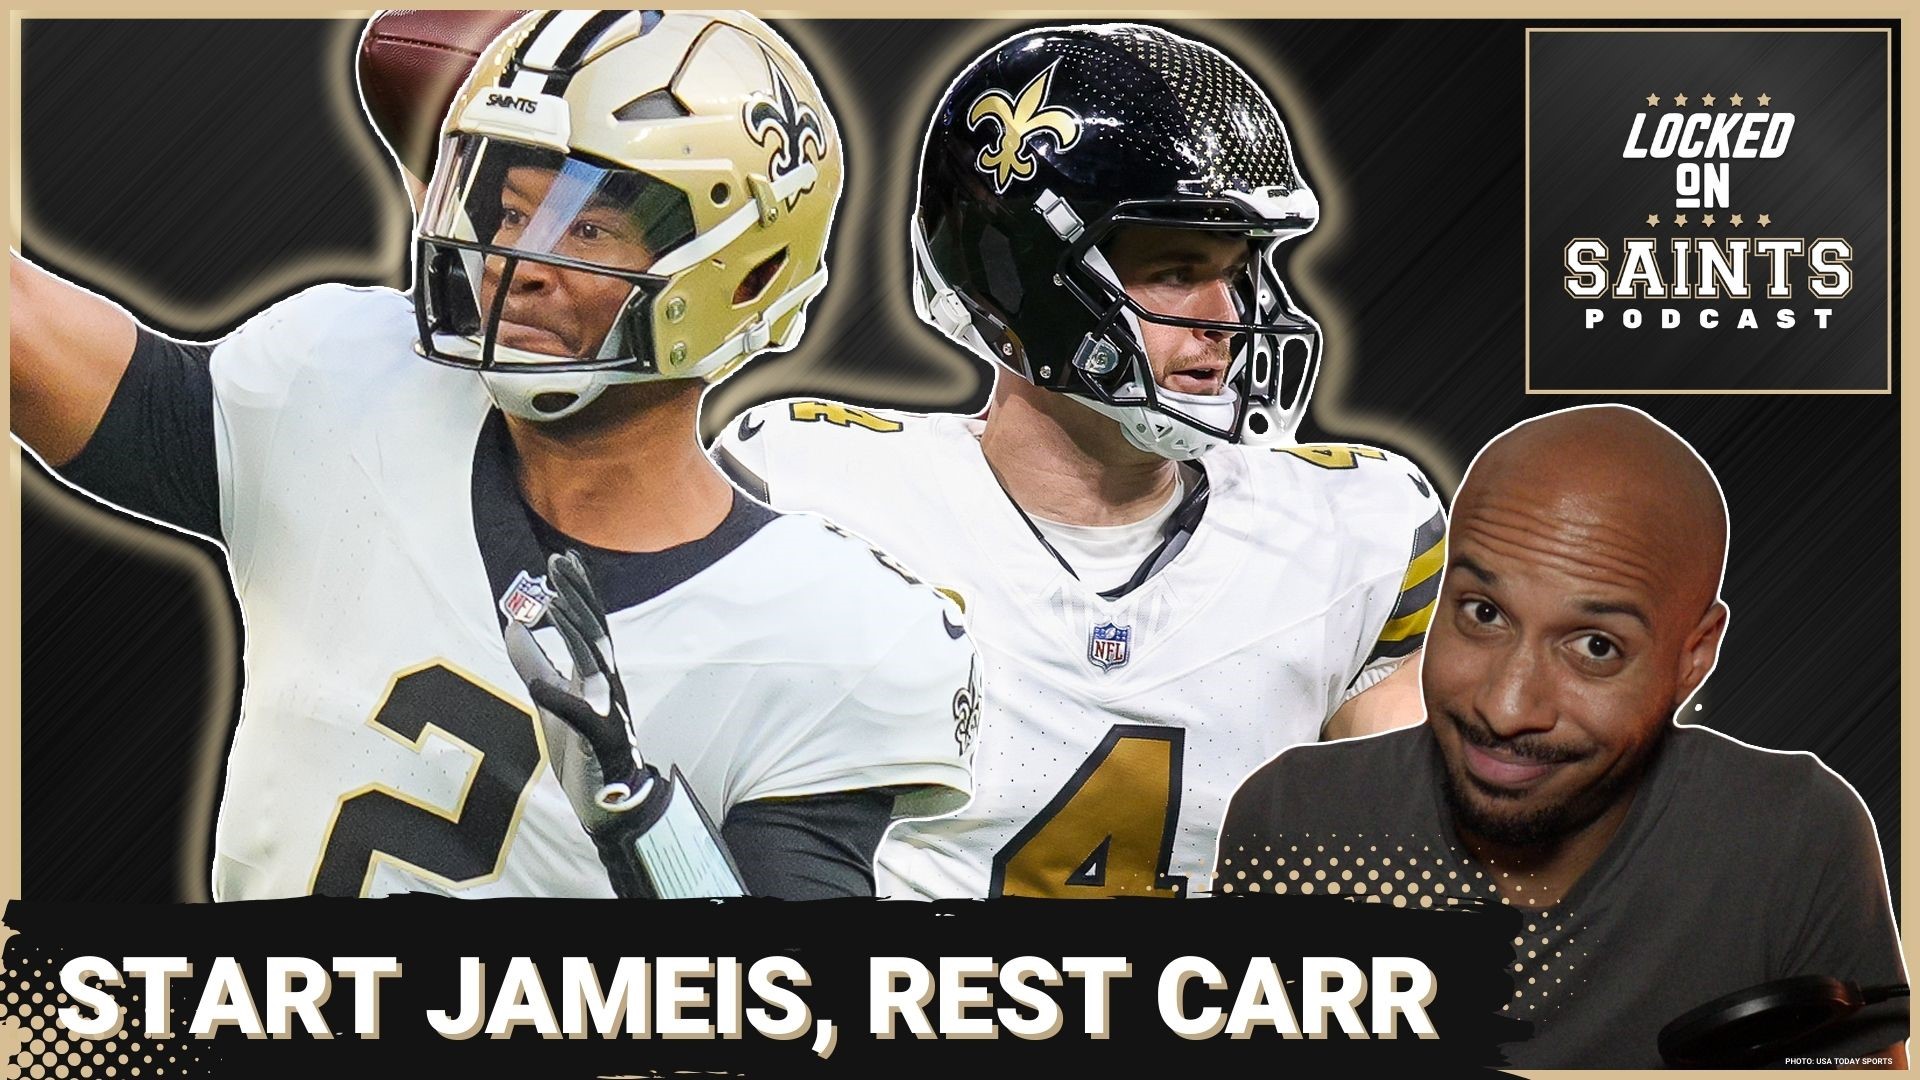 With New Orleans Saints quarterback Derek Carr in concussion protocol and managing a rib injury, it makes sense to start Jameis Winston in a winnable game vs. CAR.